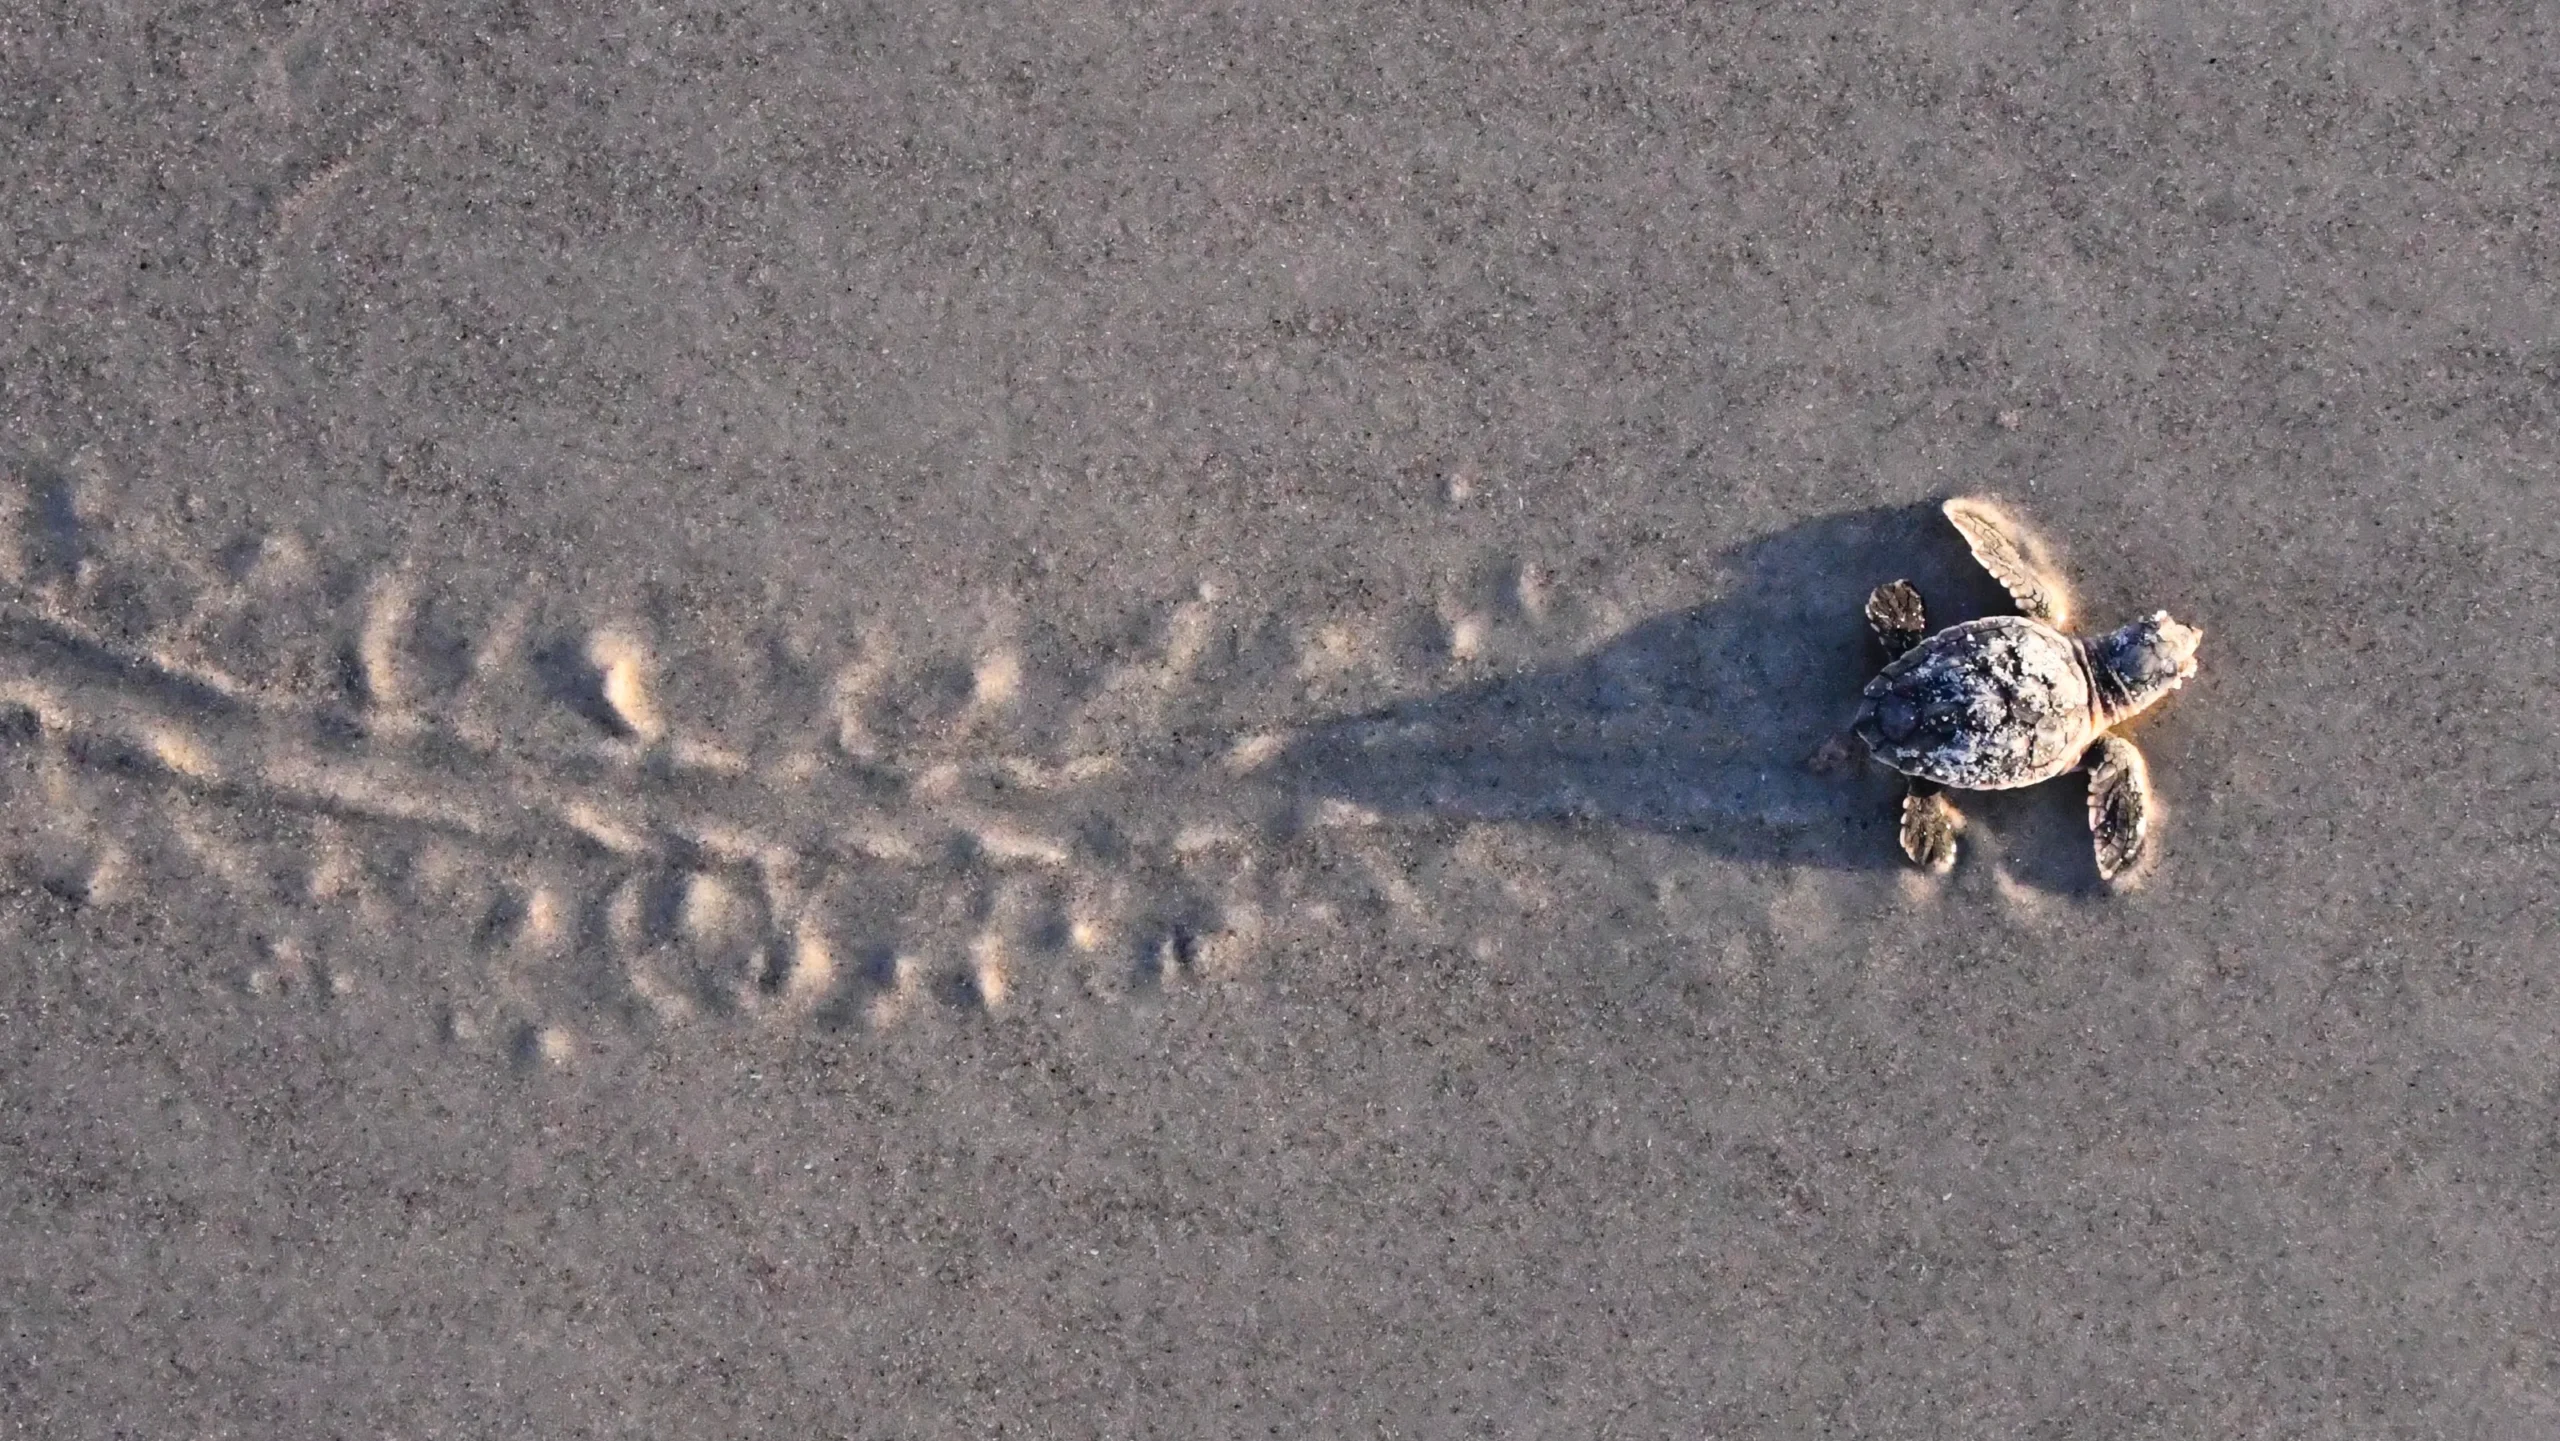 A turtle hatchling on the shore